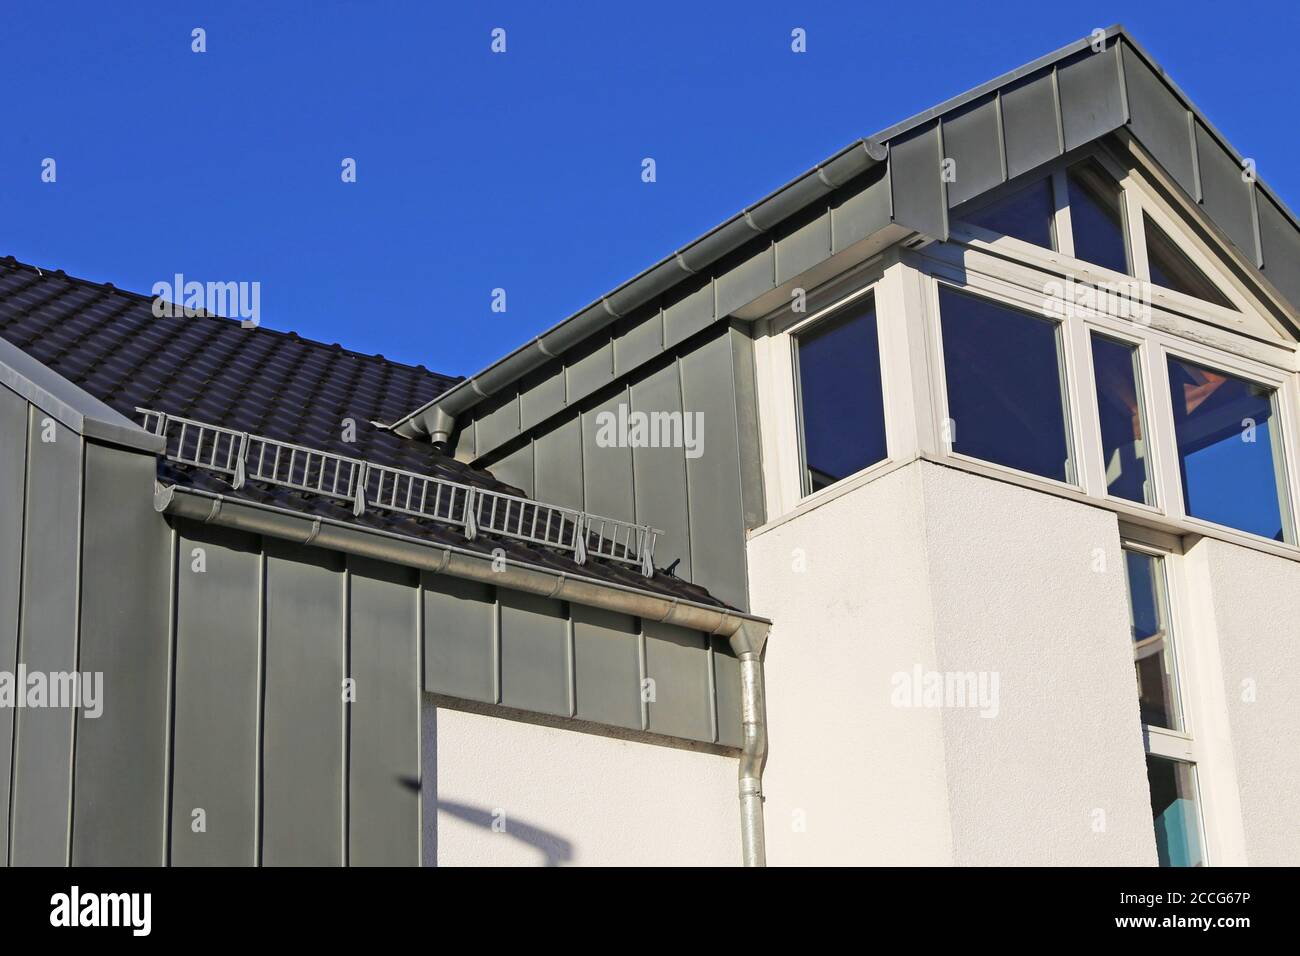 Residential home with modern standing seam facade Stock Photo